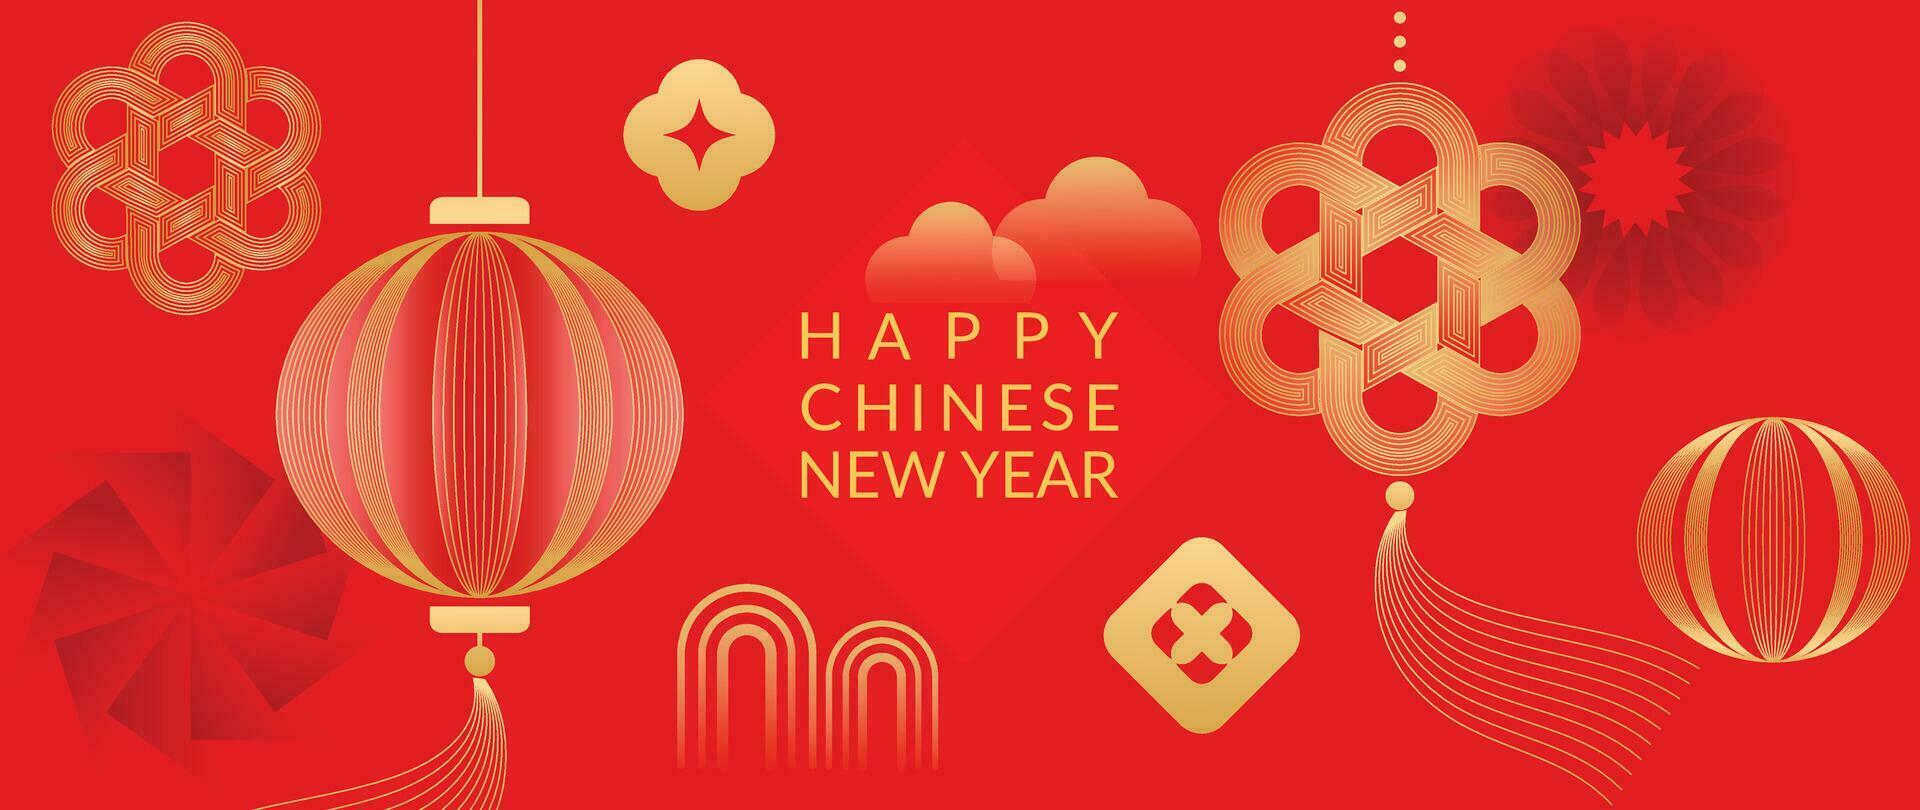 Happy Chinese new year background vector. Year of the dragon design wallpaper with chinese lantern, coin, flower. Modern luxury oriental illustration for cover, banner, website, decor. vector